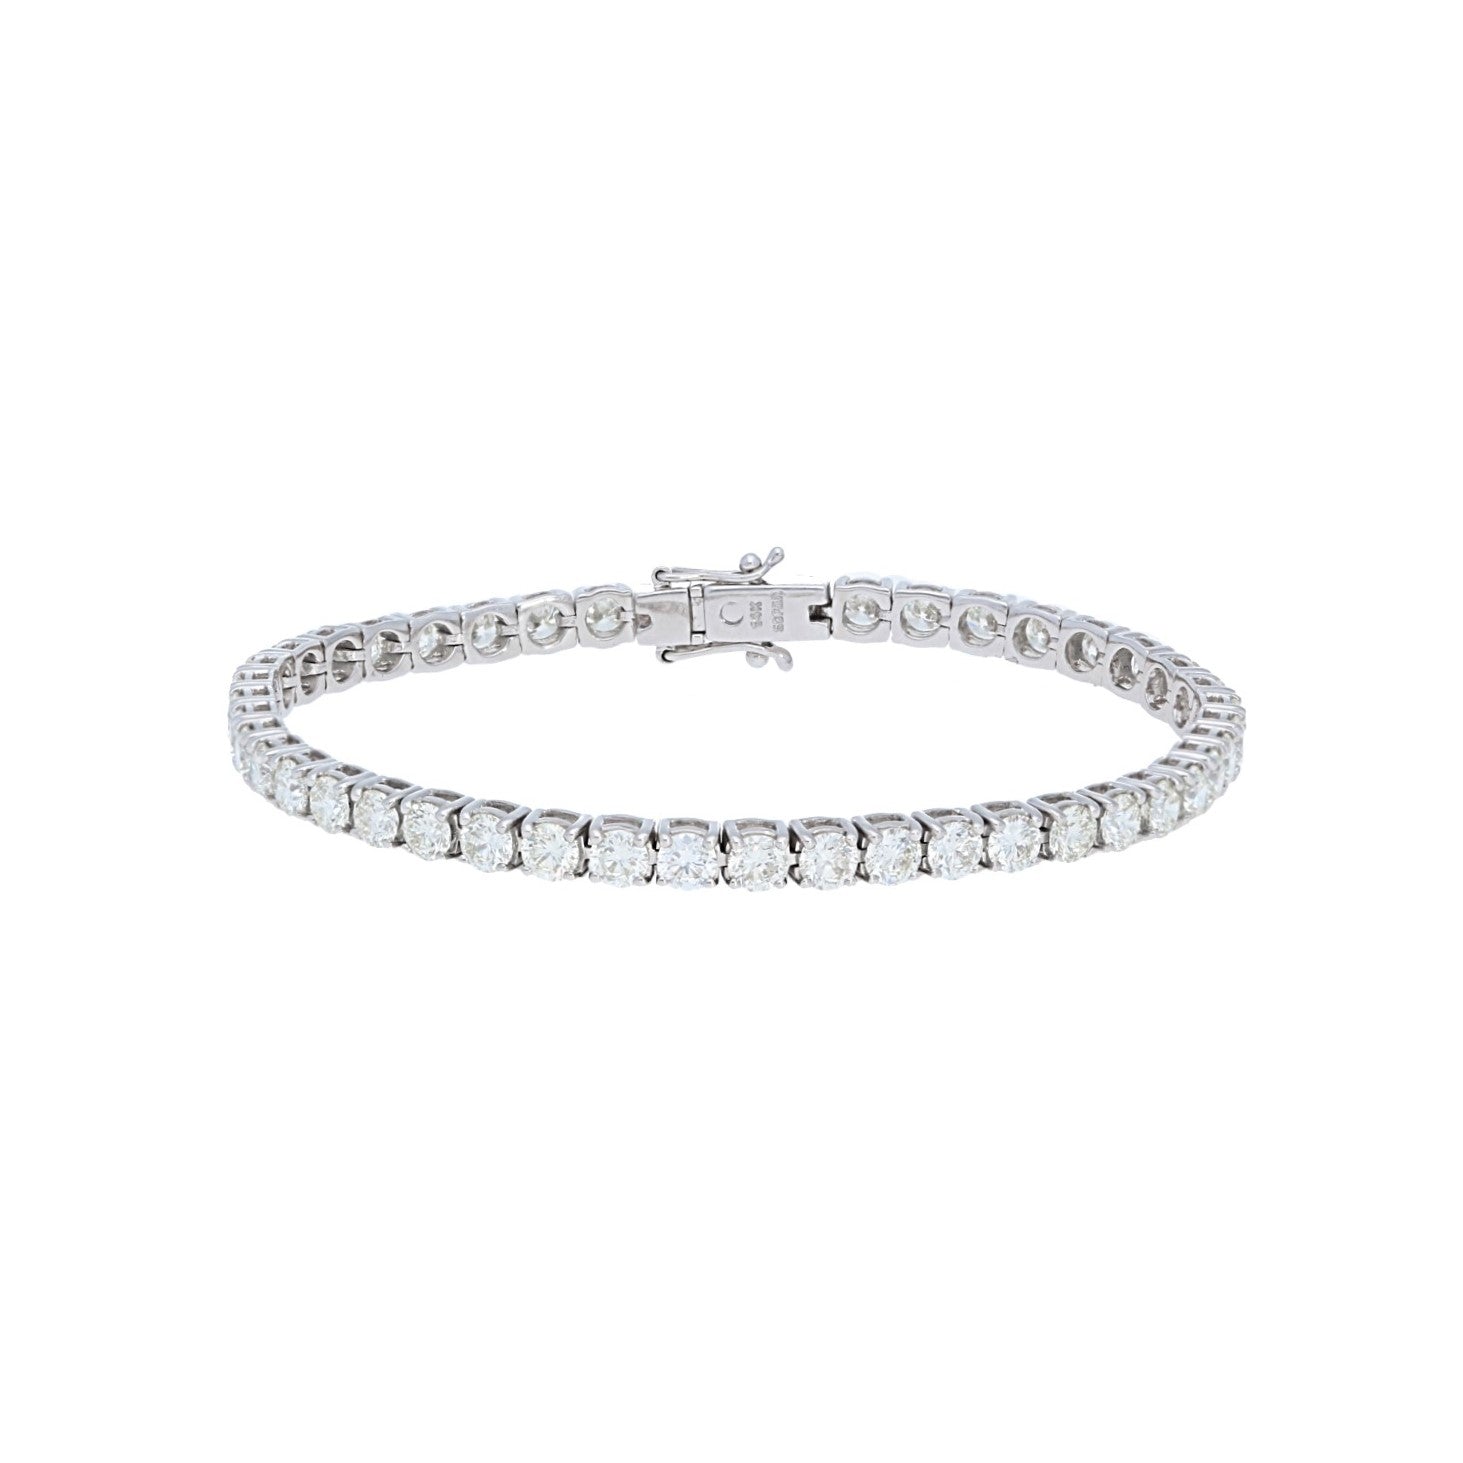 Stunning diamond tennis bracelet with white gold clasp from The Golden Jeweler Boutique.